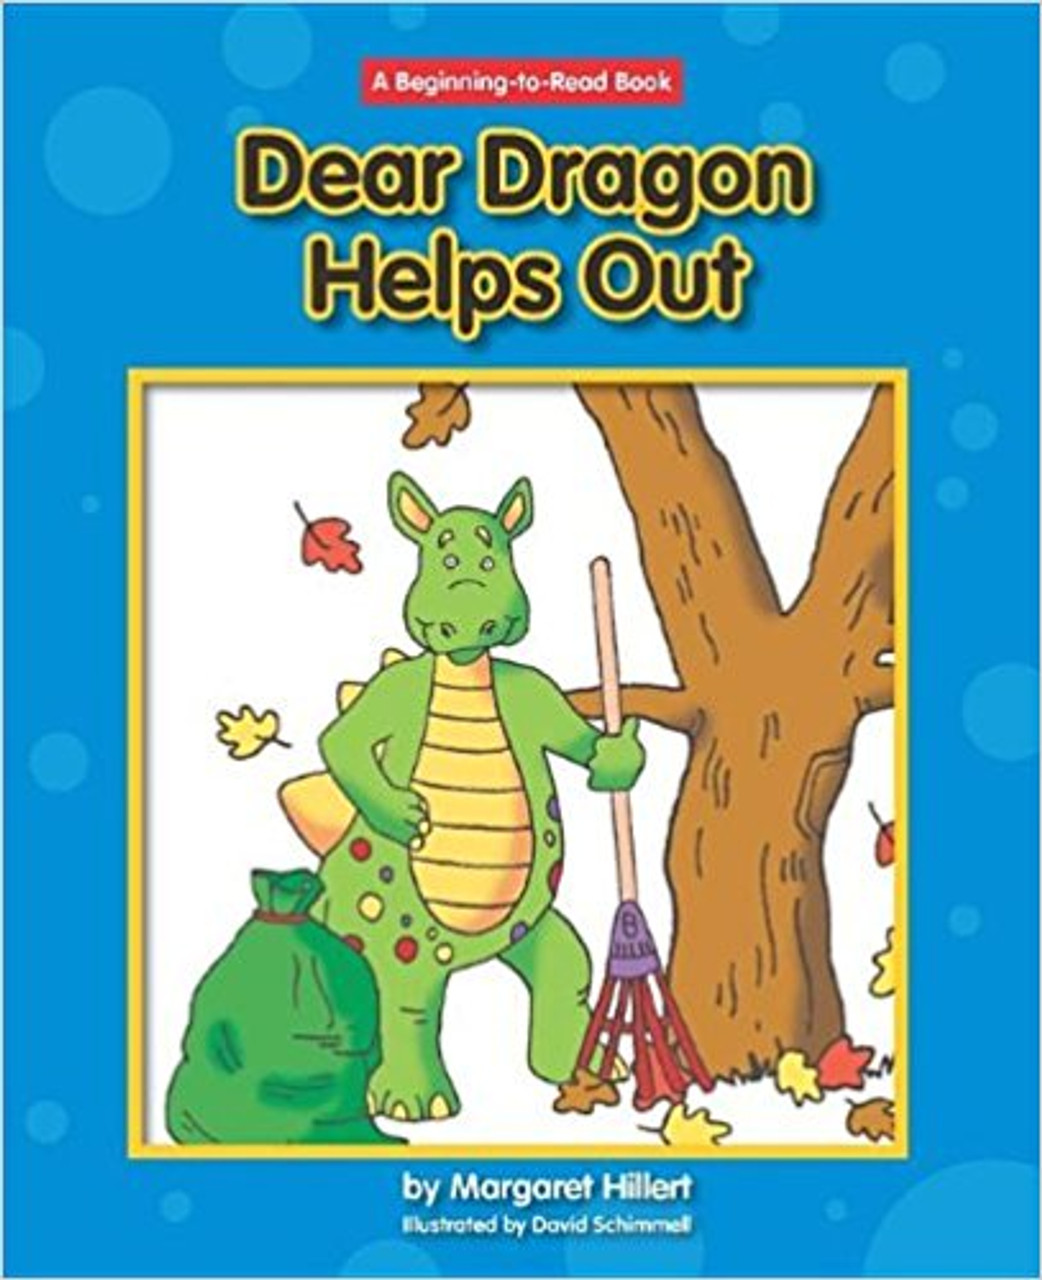 Dear Dragon Helps Out by Margaret Hillert